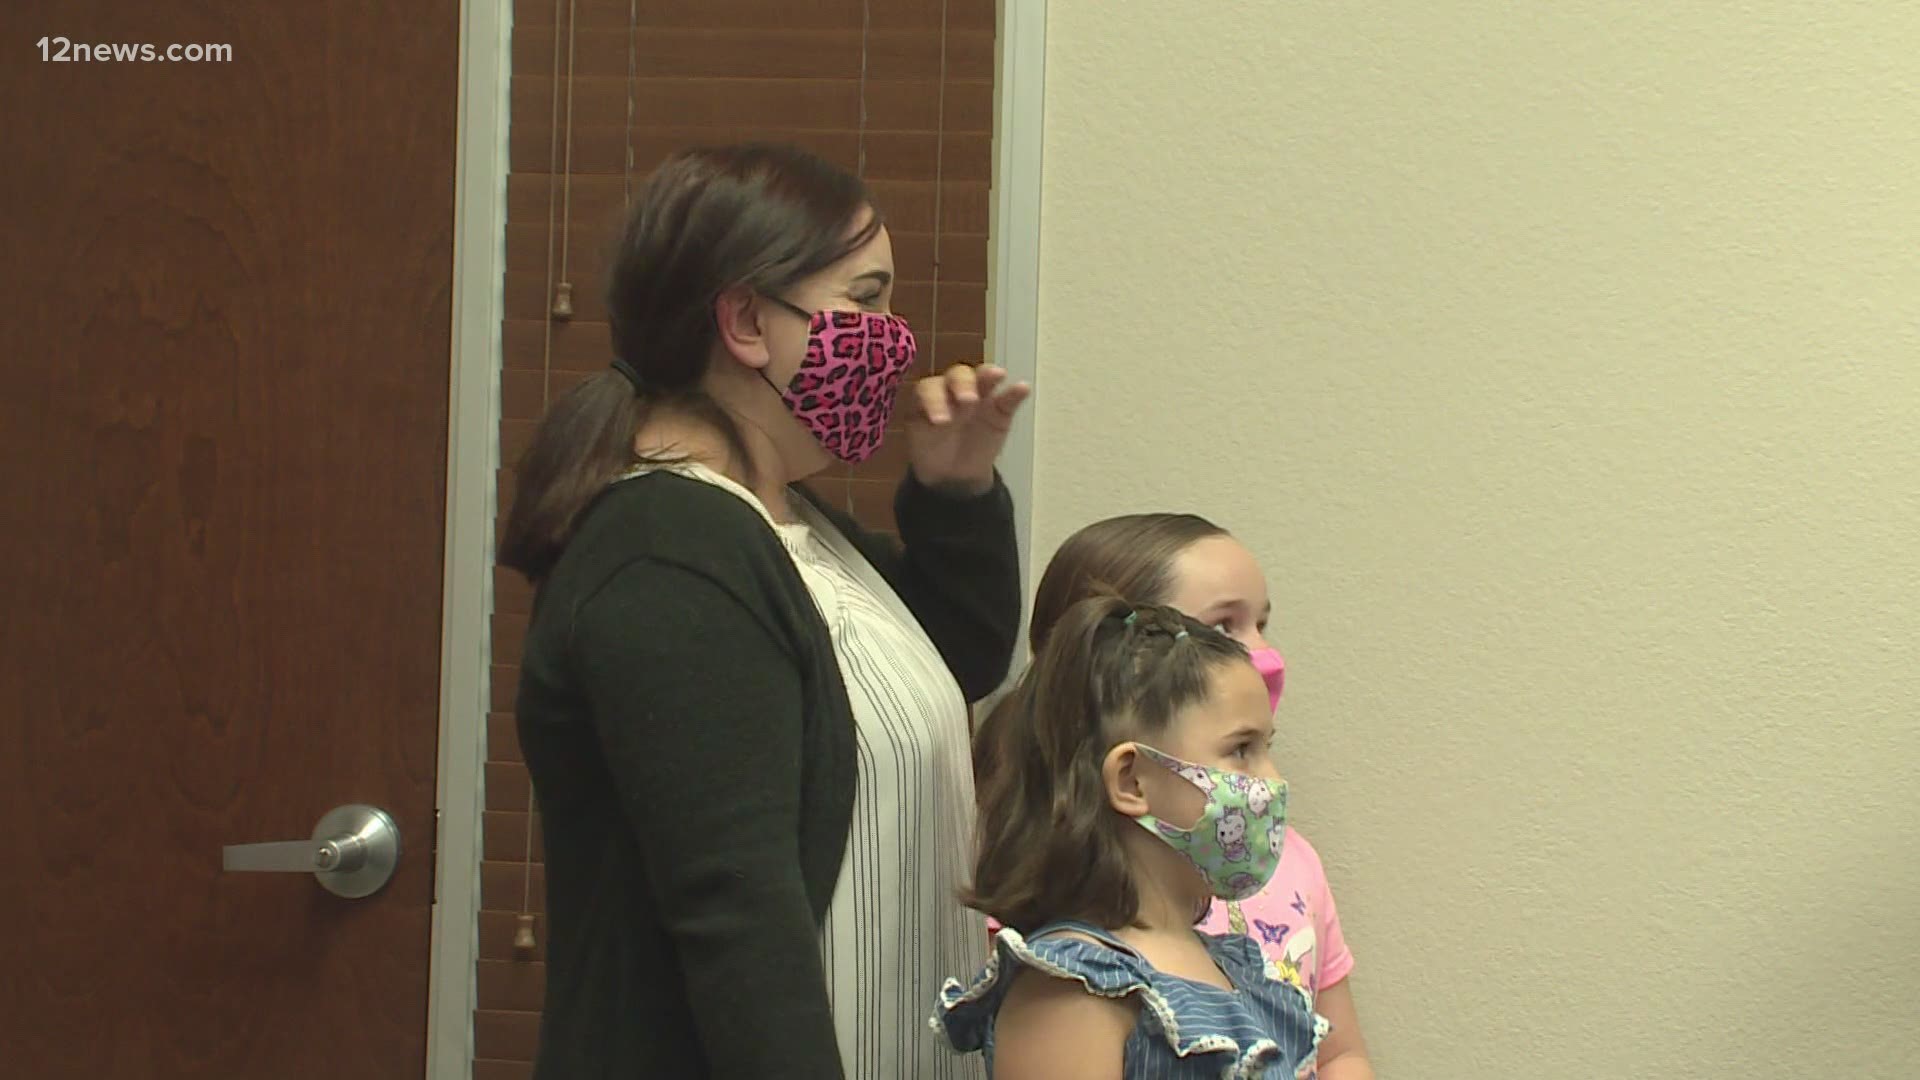 A Valley mom and her daughters got a much needed financial gift after a very difficult year. Rebecca and her kids will get help with their mortgage for six months.